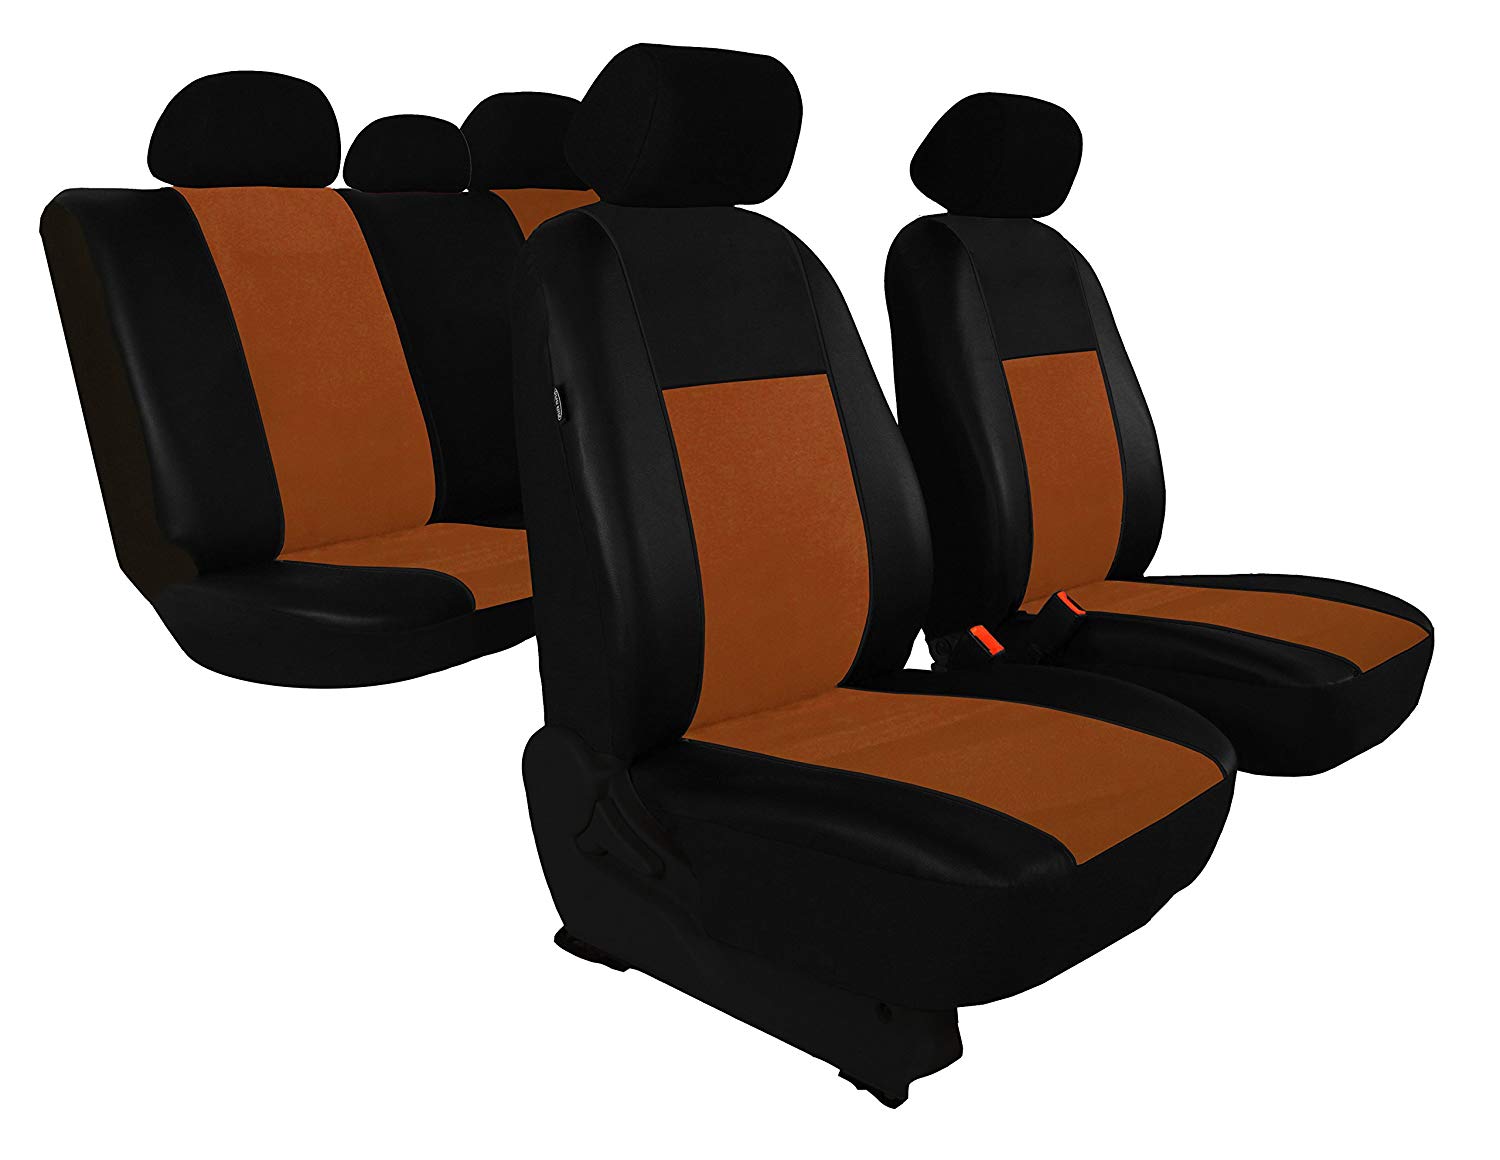 \'CUSTOMISED Car Seat Cover Set for Tiguan II 2016 from Unico. Colour: Brown.